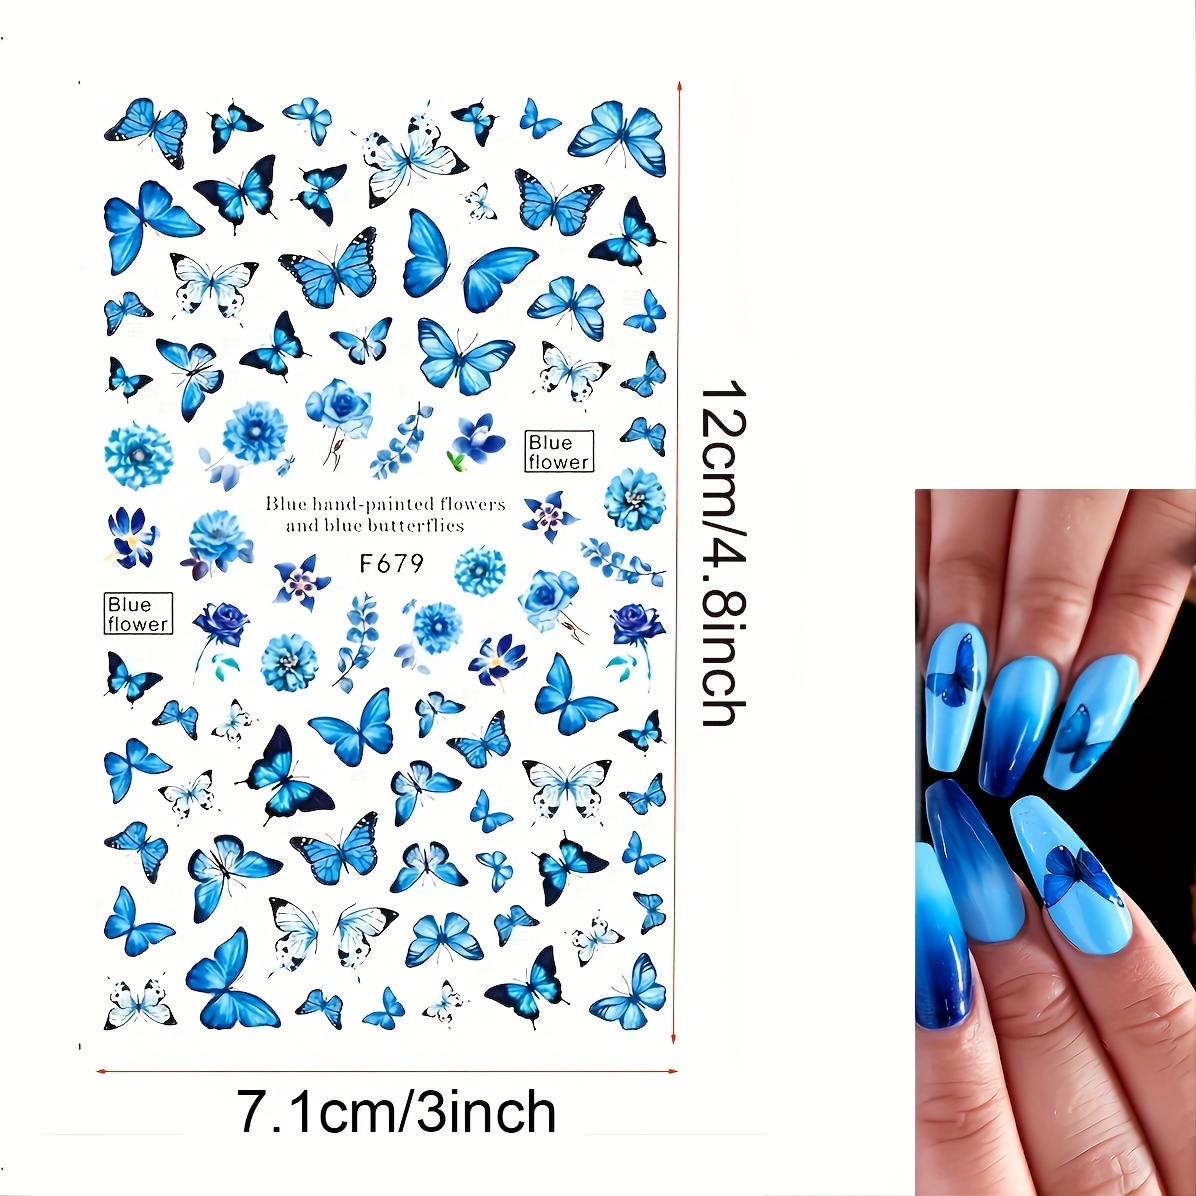 Butterfly Nail Art Stickers , 3D Self-Adhesive Nail Decals Colorful  Butterflies Spring Flowers Nail Designs for Acrylic Nails Supplies Manicure  Decorations 8 Sheets H Butterfly